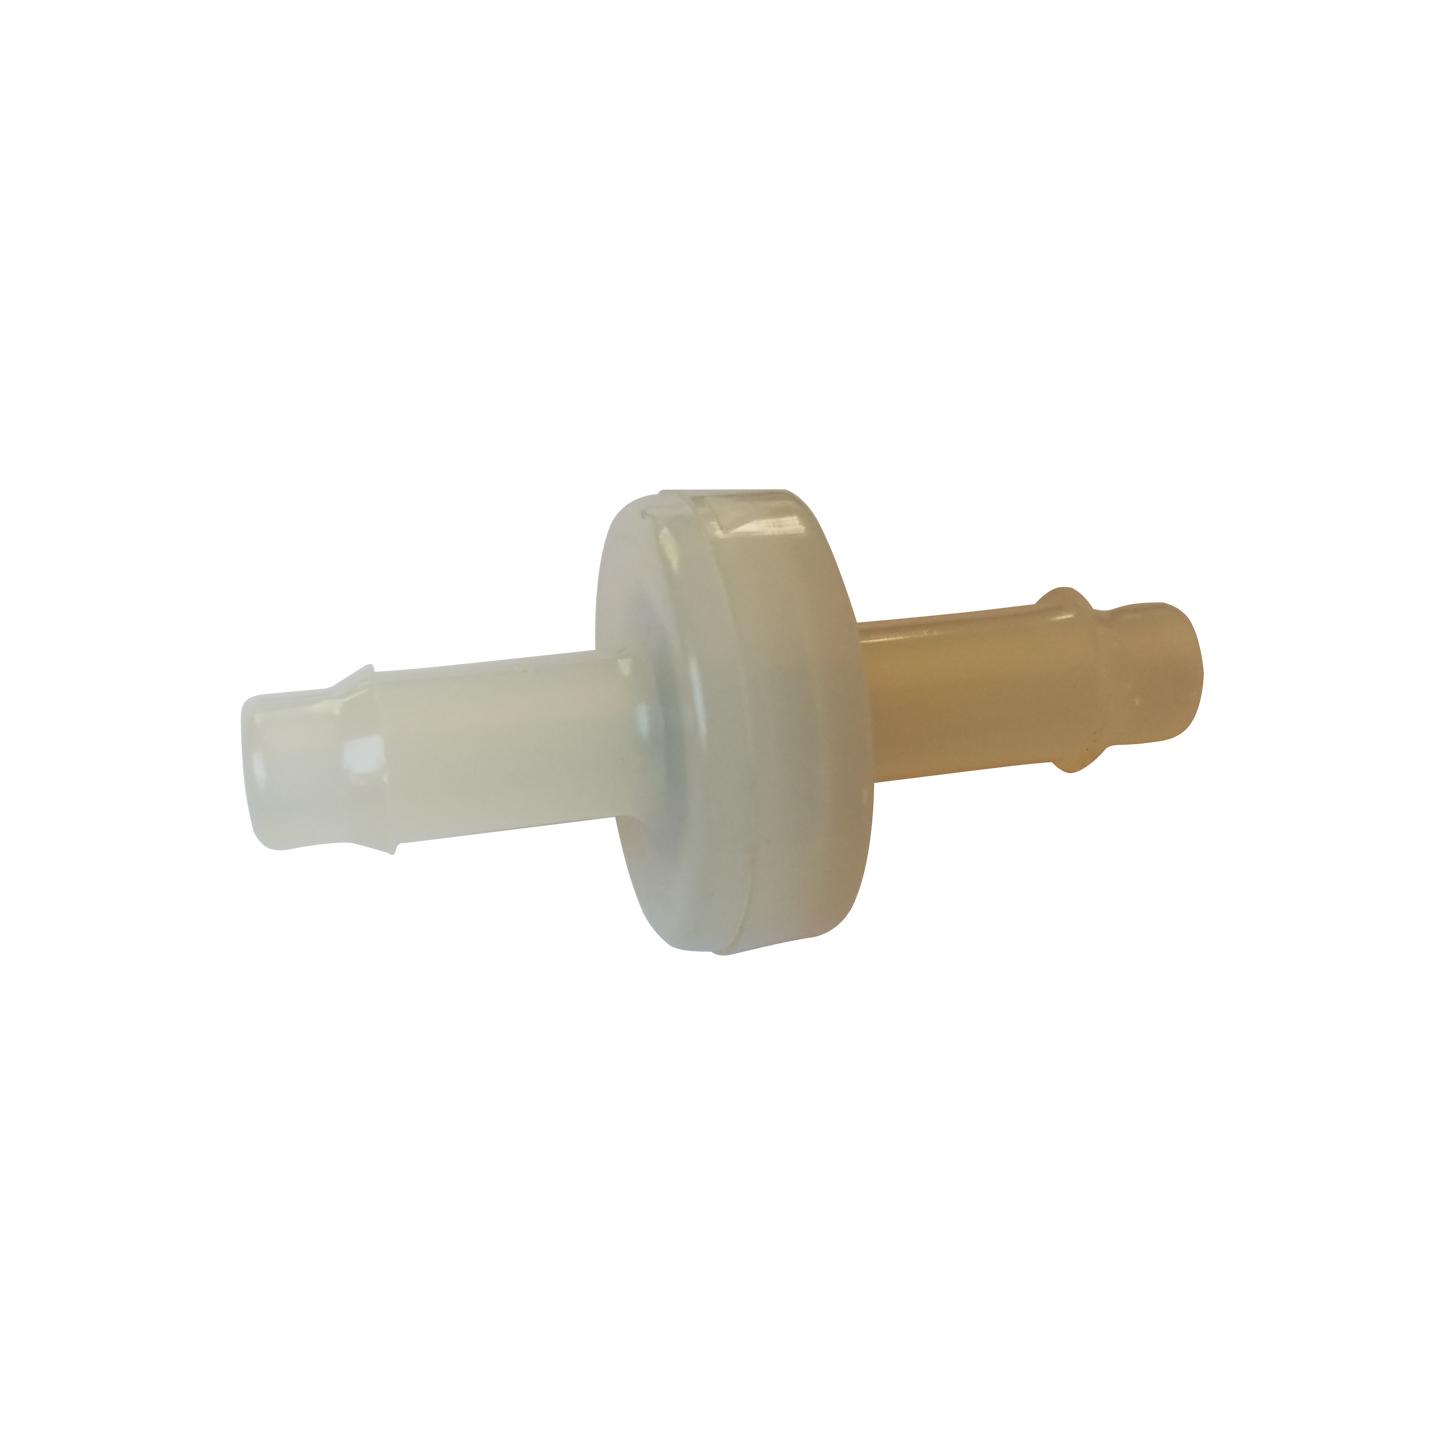 Small Ozone Check Valve for the Eco Laundry Washers